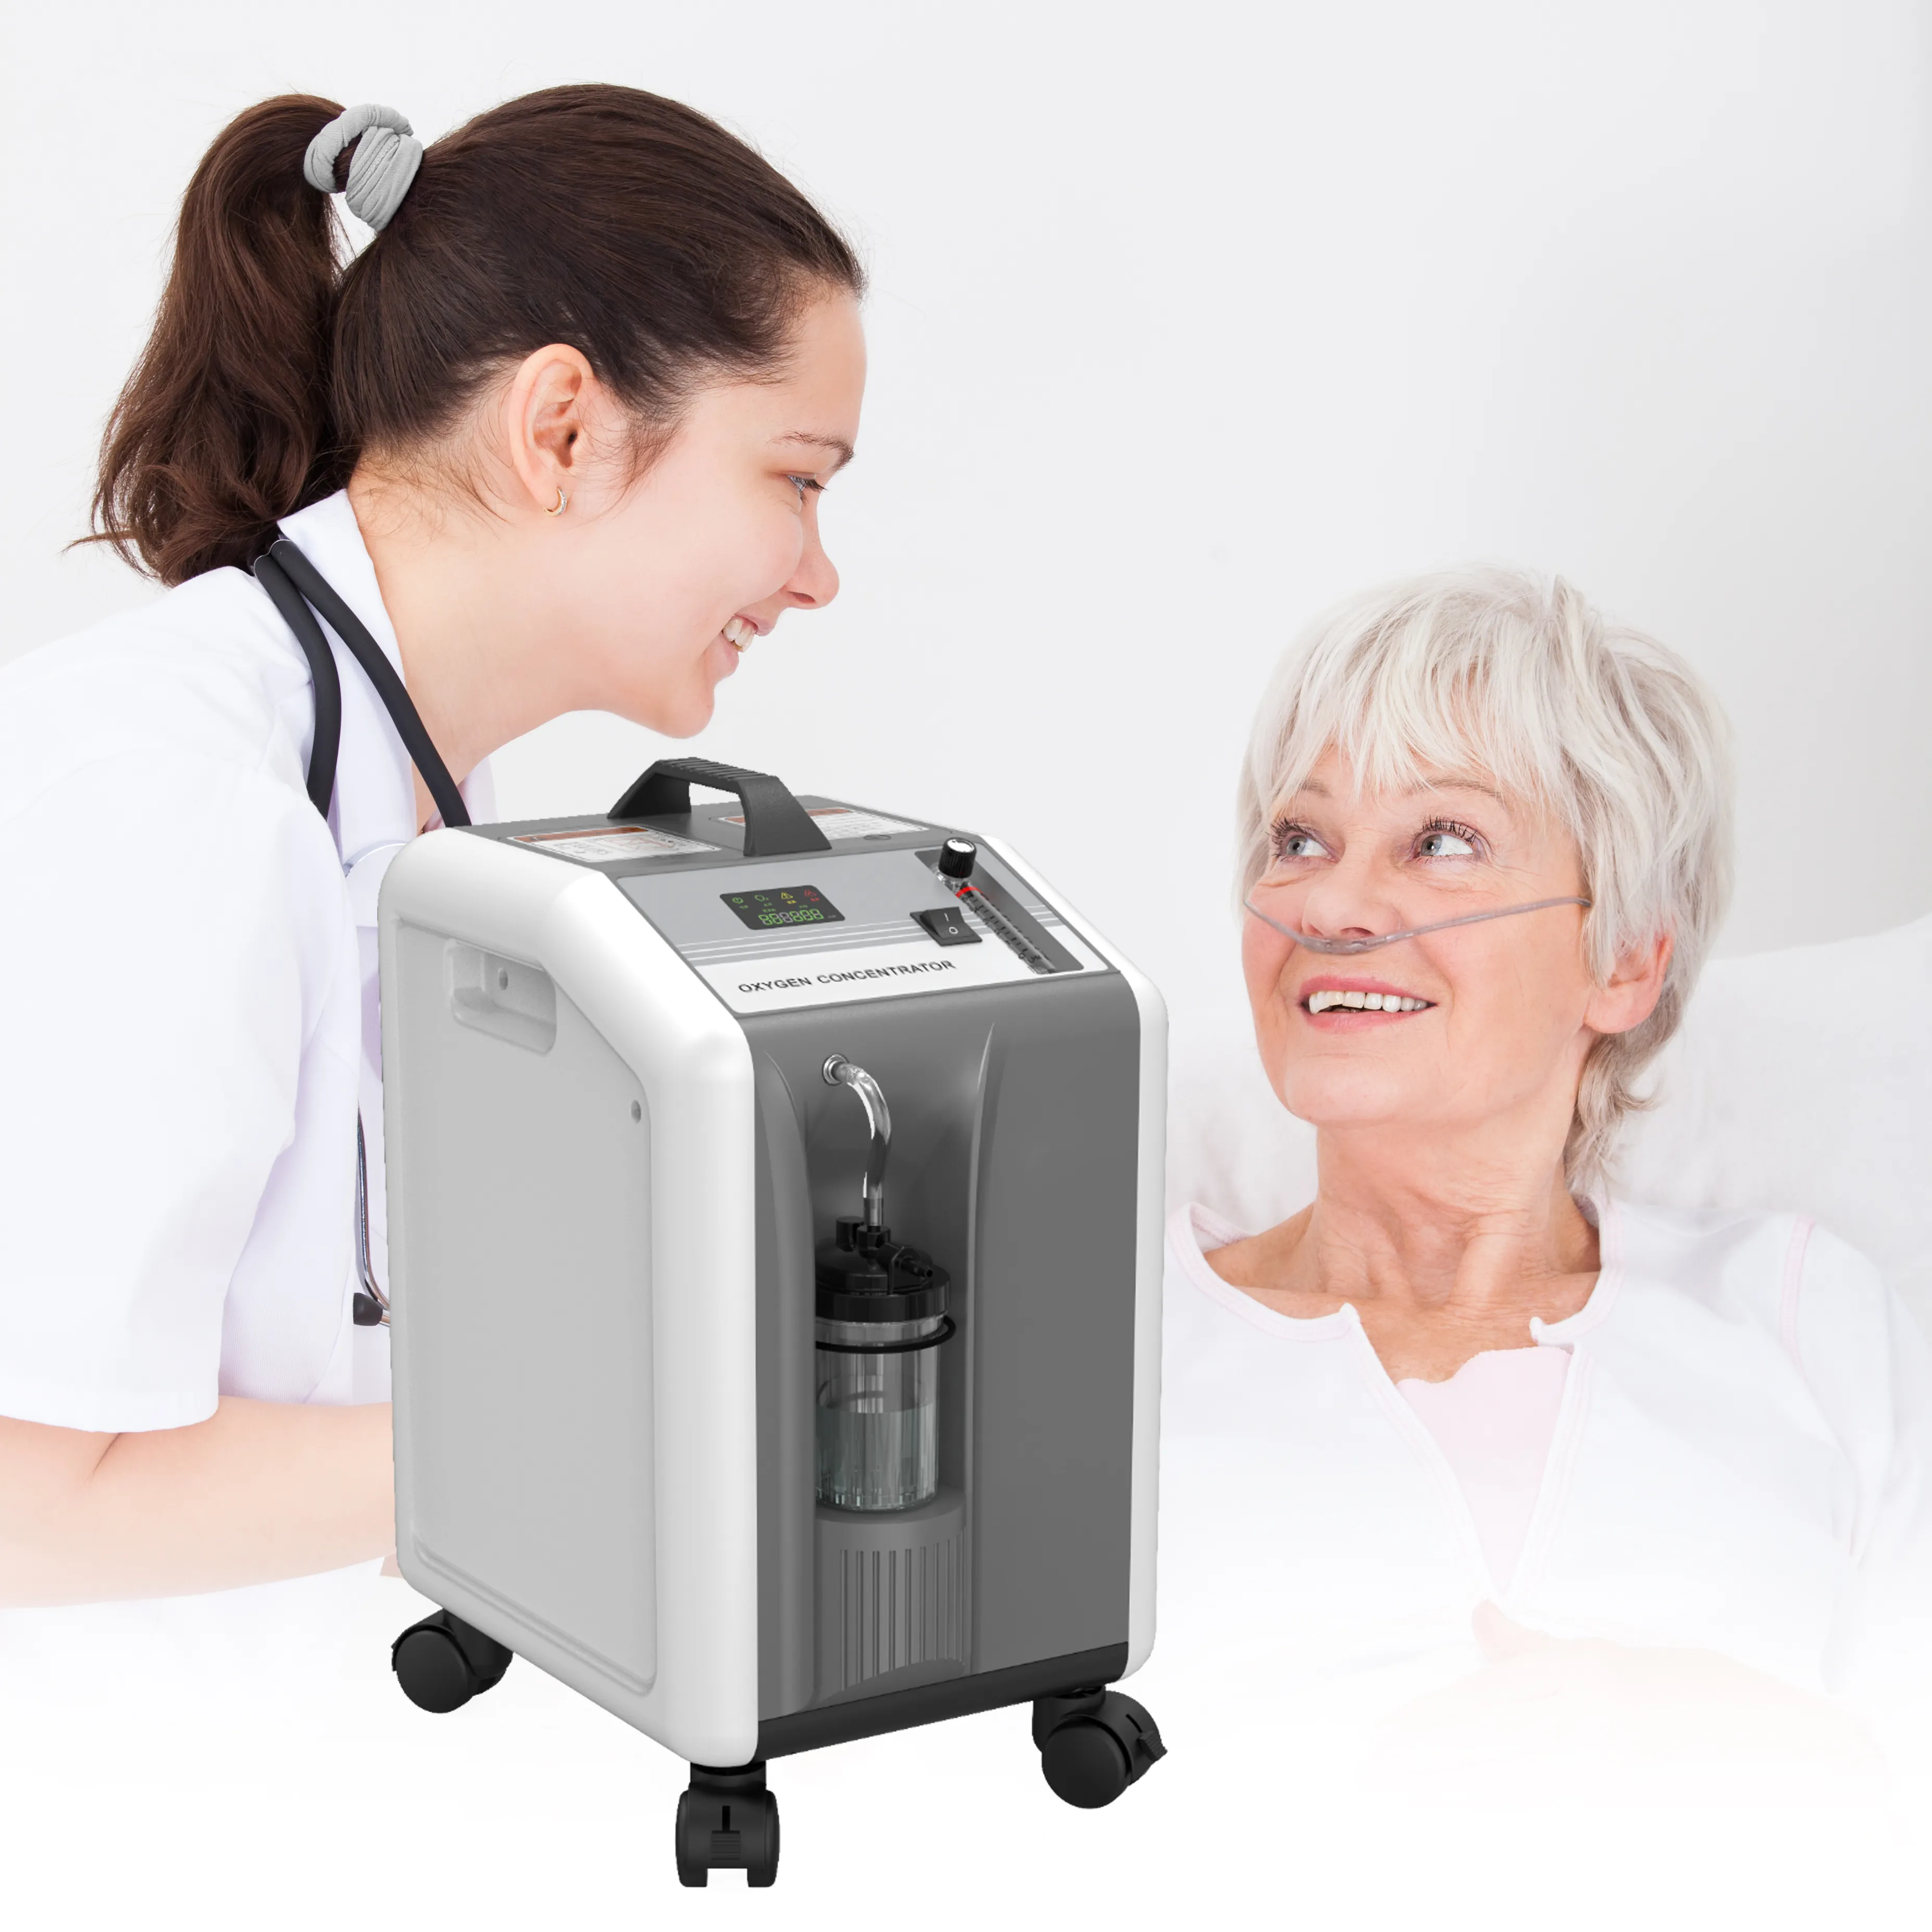 MICiTECH Manufacture High Flow Rate PSA Oxygene Generator Oxygen Concentrator Medical Grade Two Portable MiniOxygen Concentrator